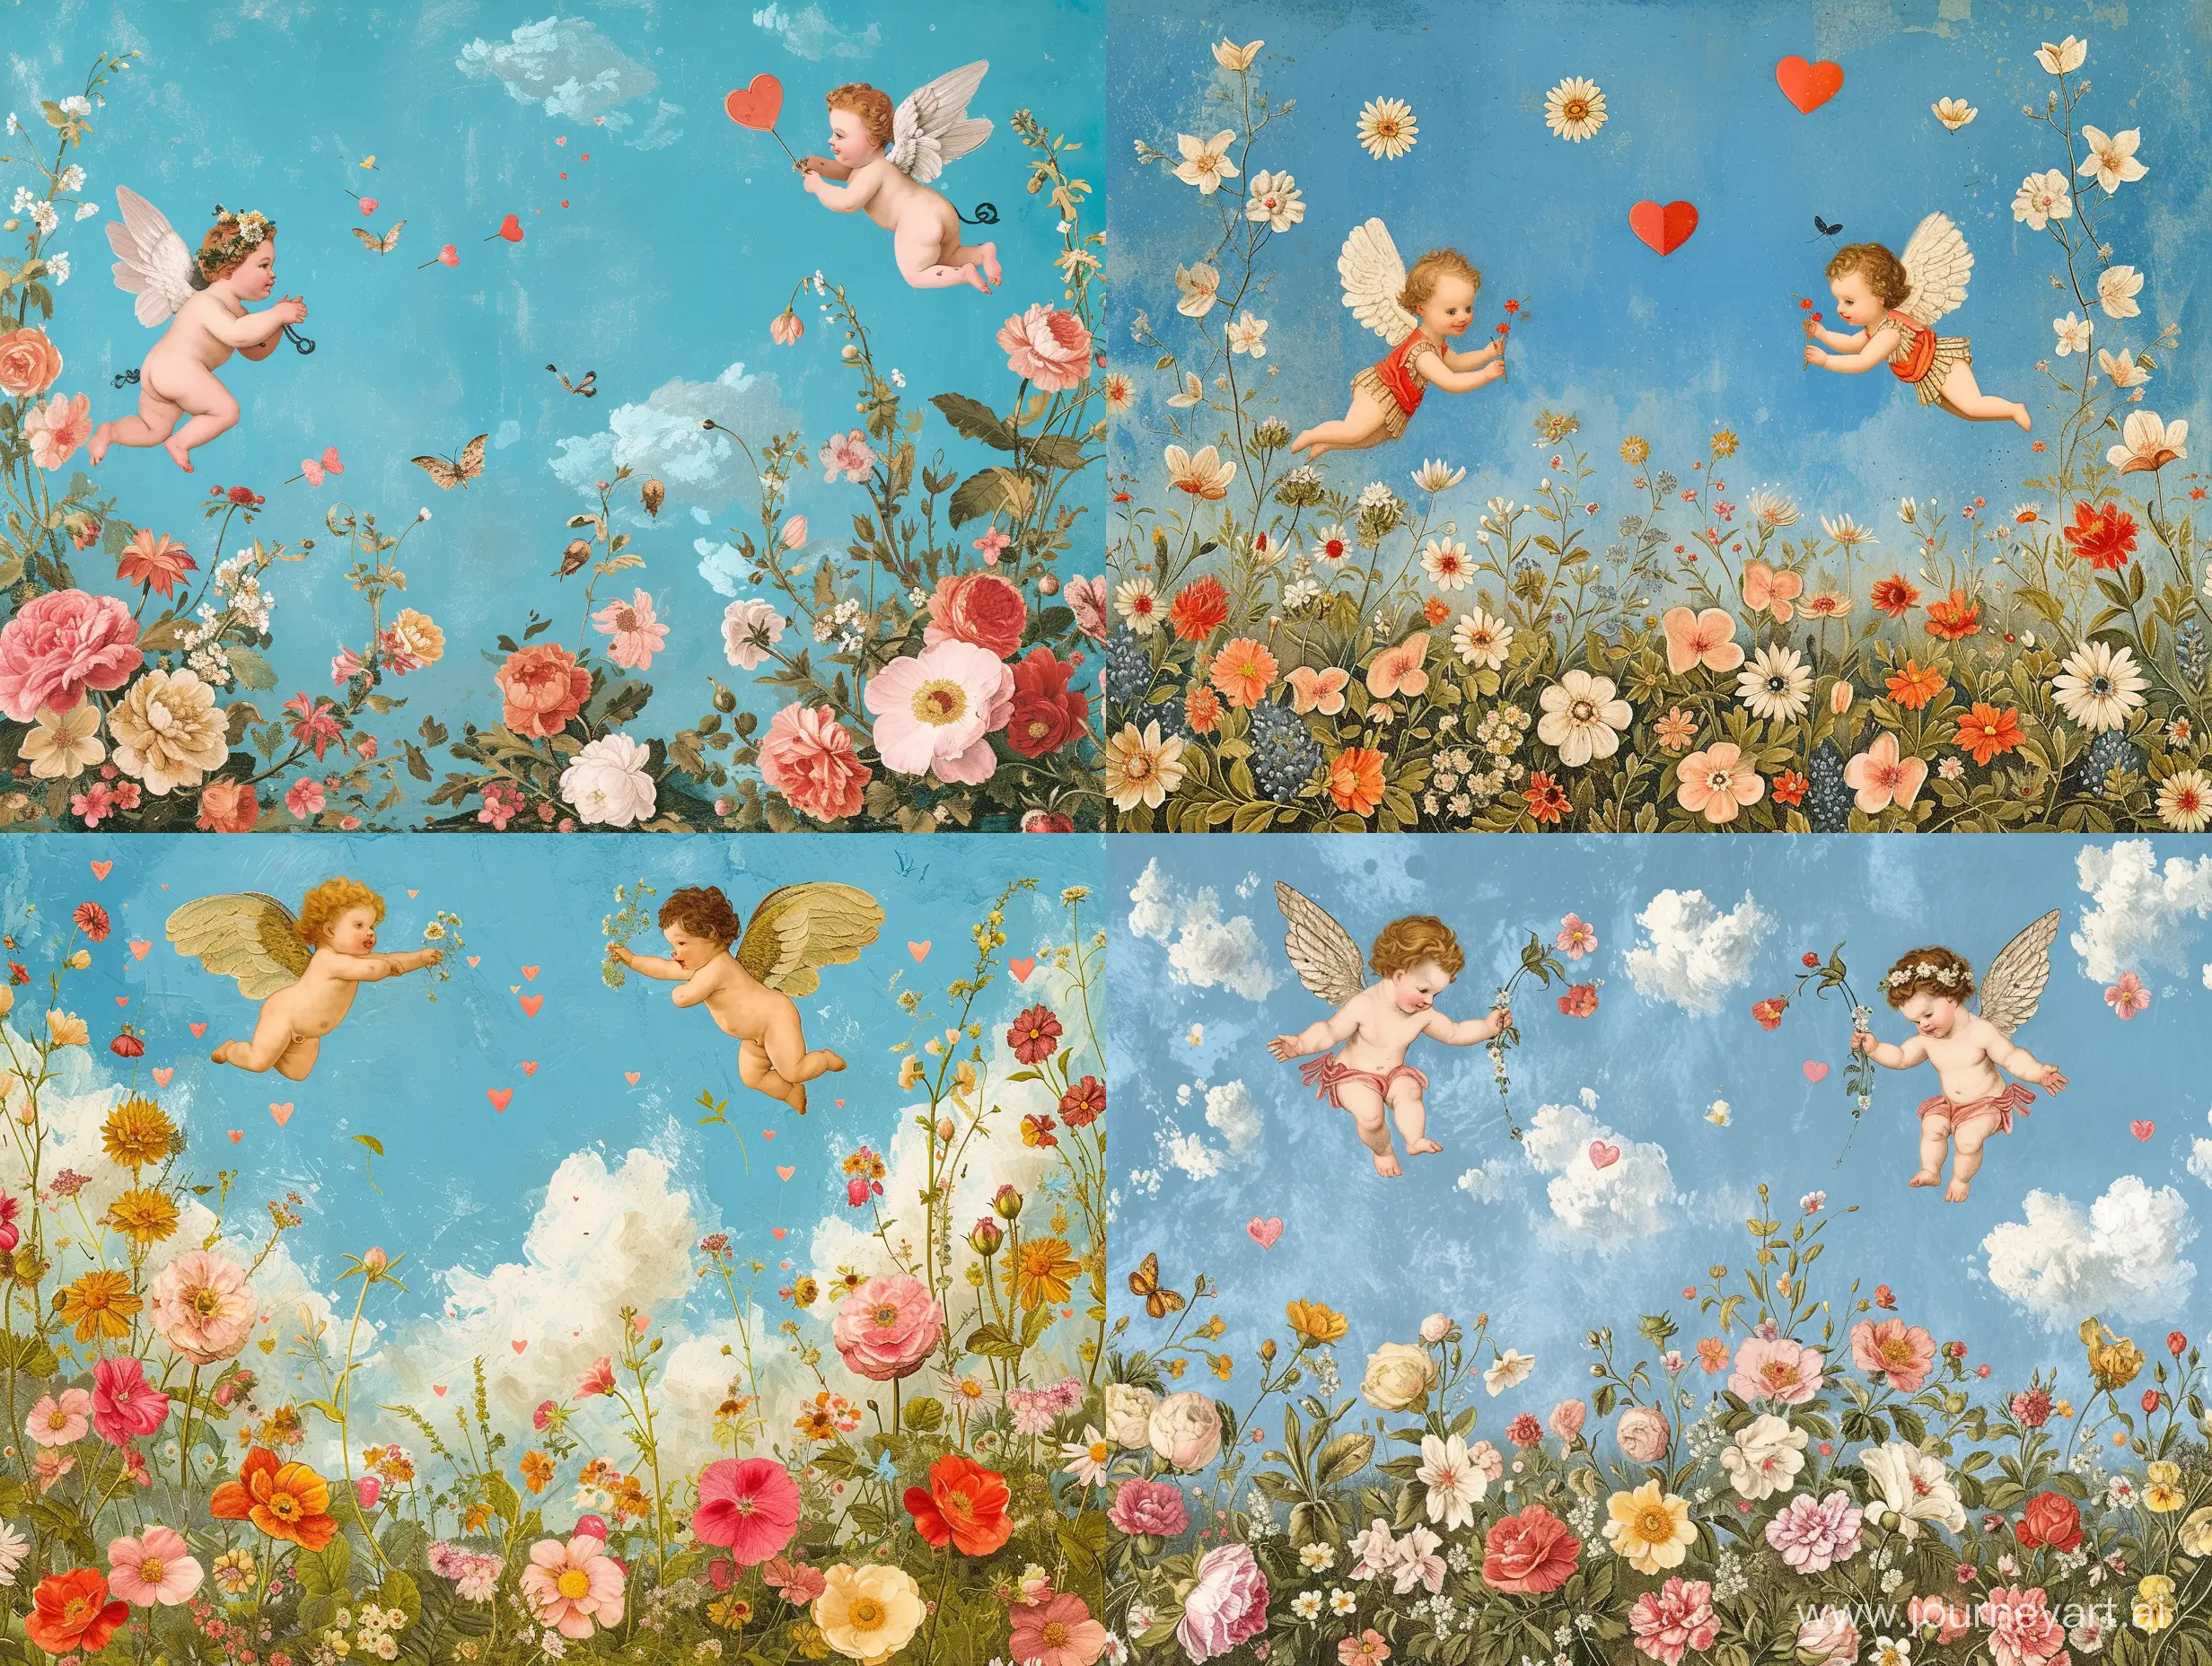 ornamental postcard, with floral variations, flower meadow on a blue sky background,two cupids flying around, hearts, love, ornamental, romantic style, decorative, oil painting, Renaissance, ink, light colors, James Christensen style